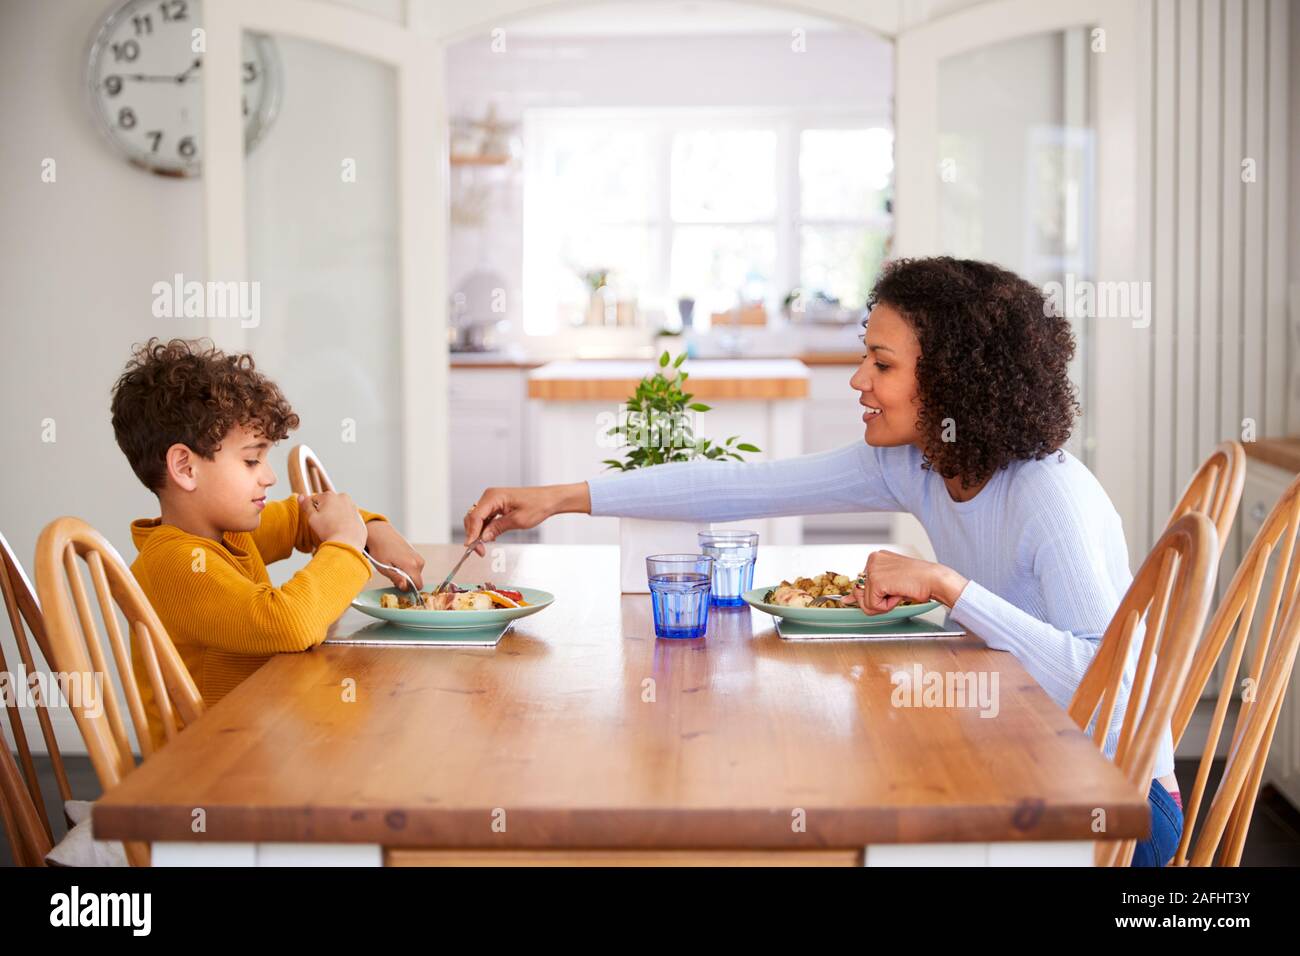 https://c8.alamy.com/comp/2AFHT3Y/single-mother-sitting-at-table-eating-meal-with-son-in-kitchen-at-home-2AFHT3Y.jpg